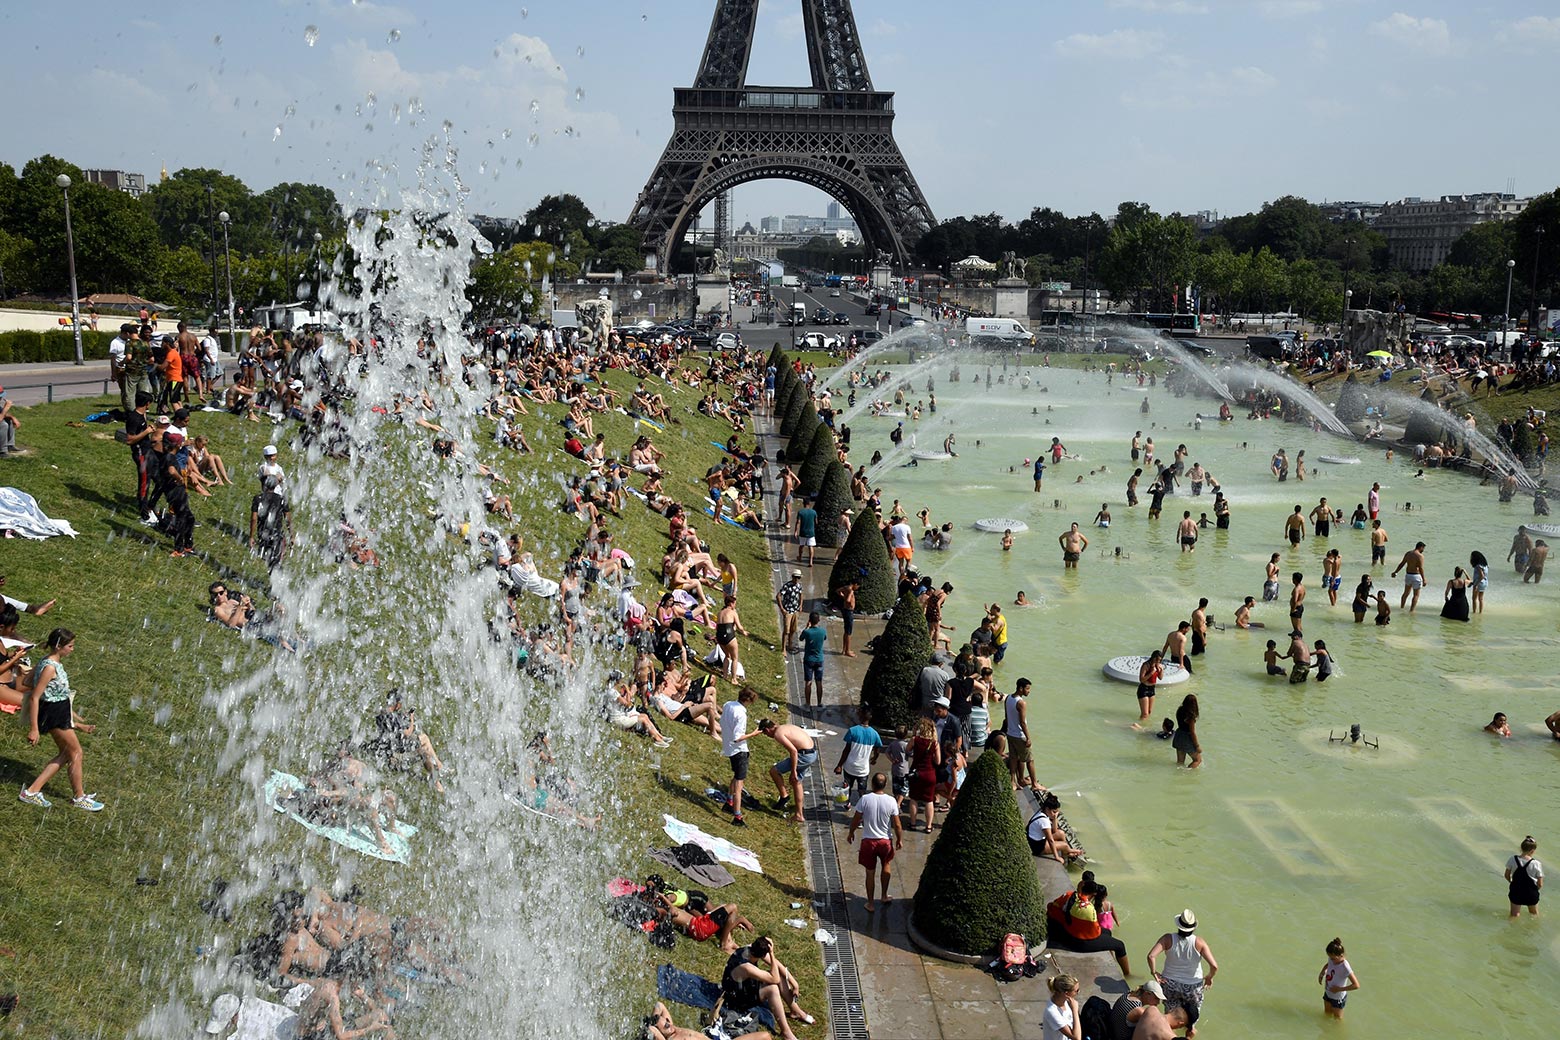 People cool off and sunbathe by the Trocadéro fountains next to the Eiffel Tower in Paris on Thursday.